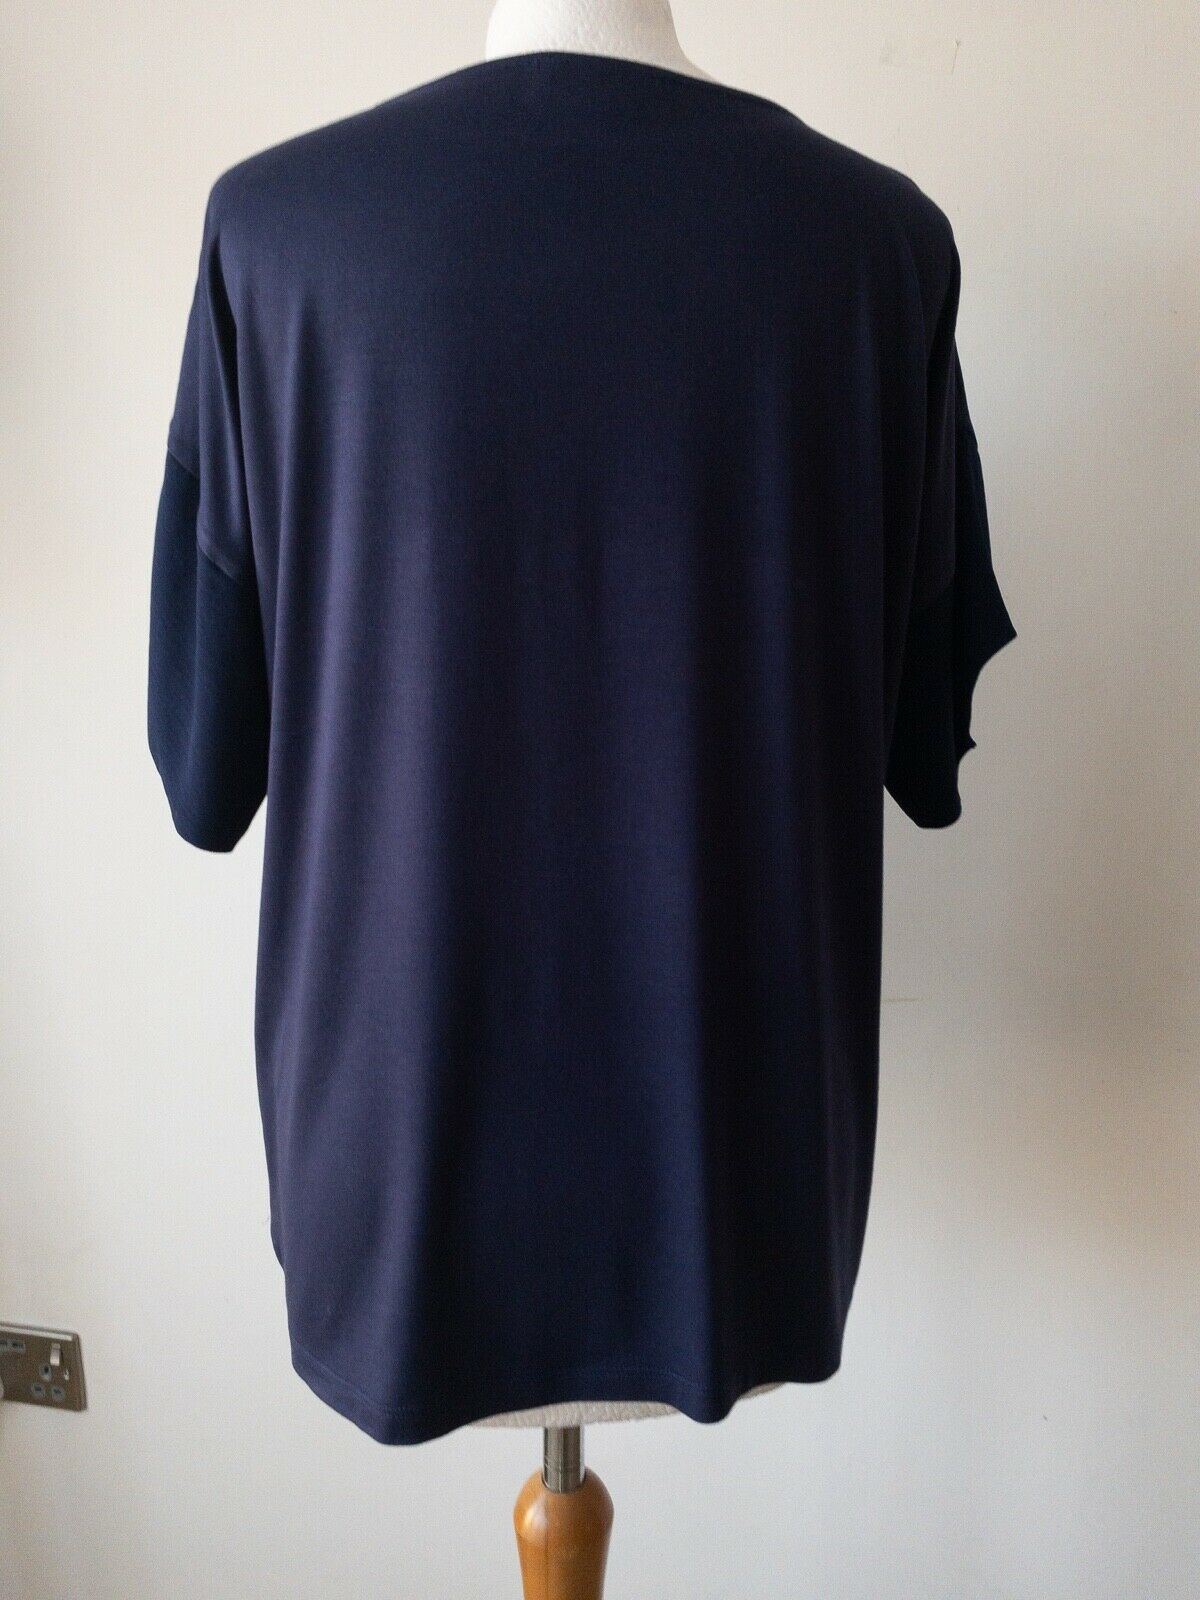 Dark Blue Contrast Material Top Tee Size M